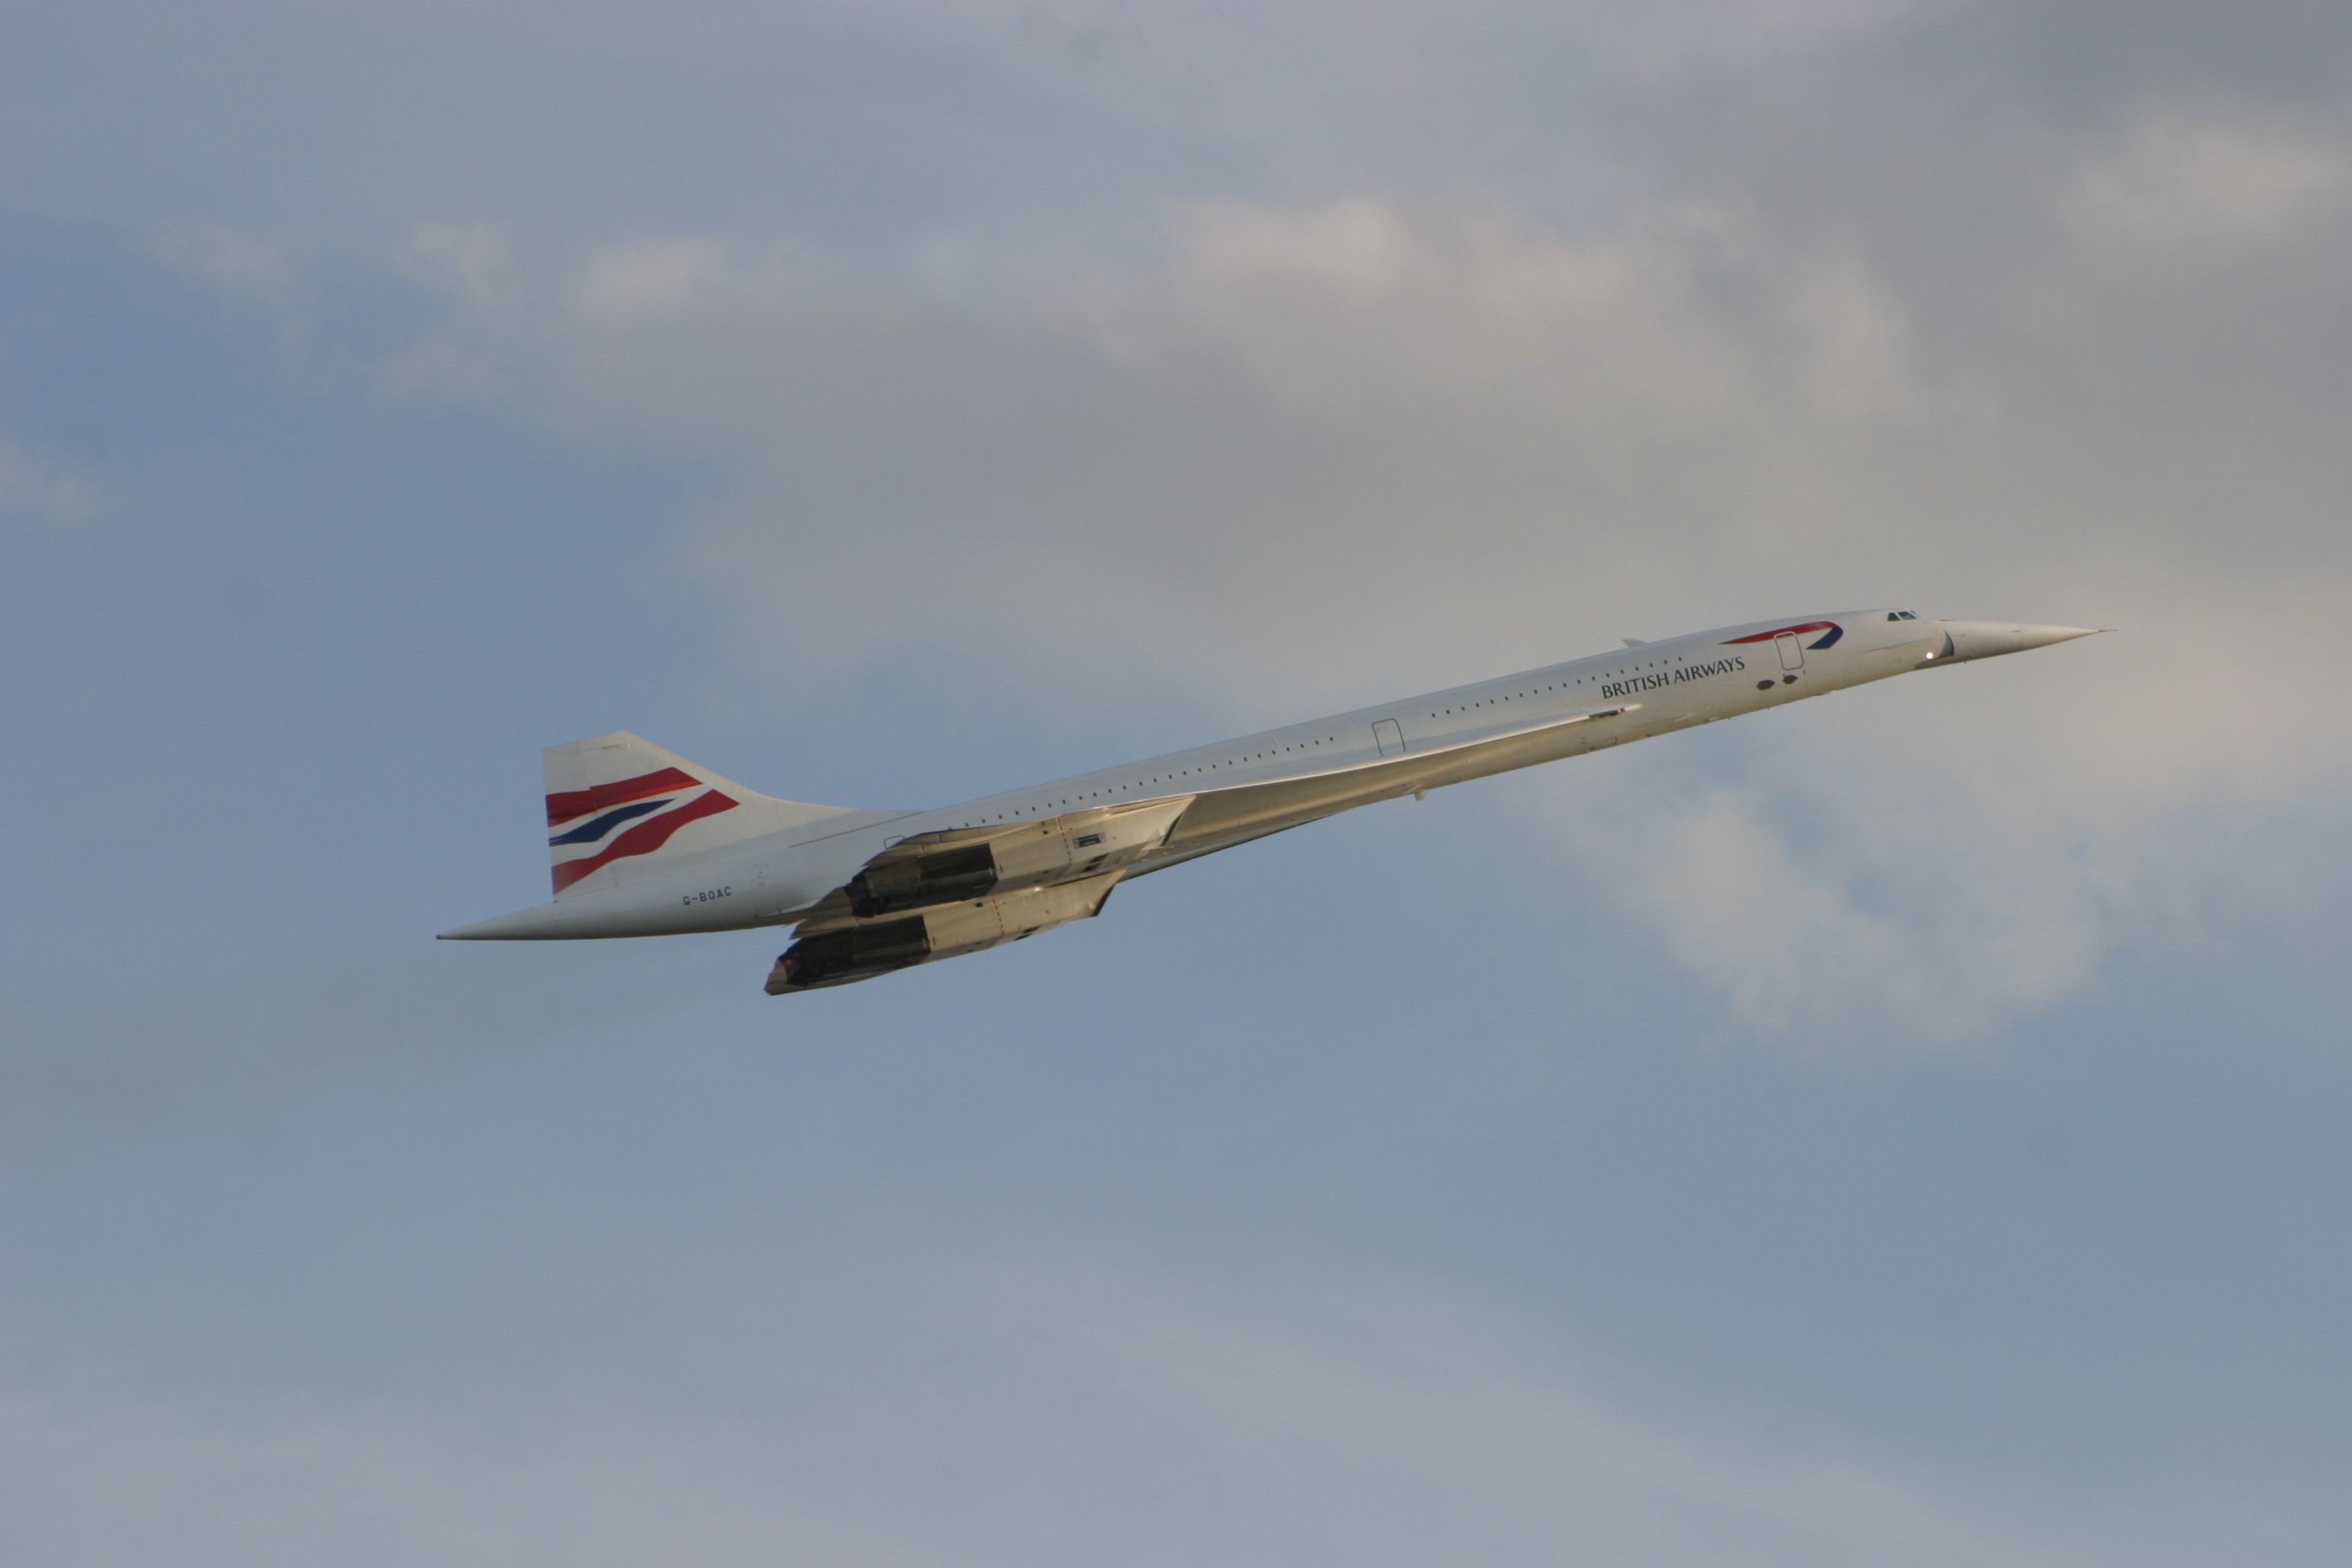 A British Airways Concorde Flying in the sky.